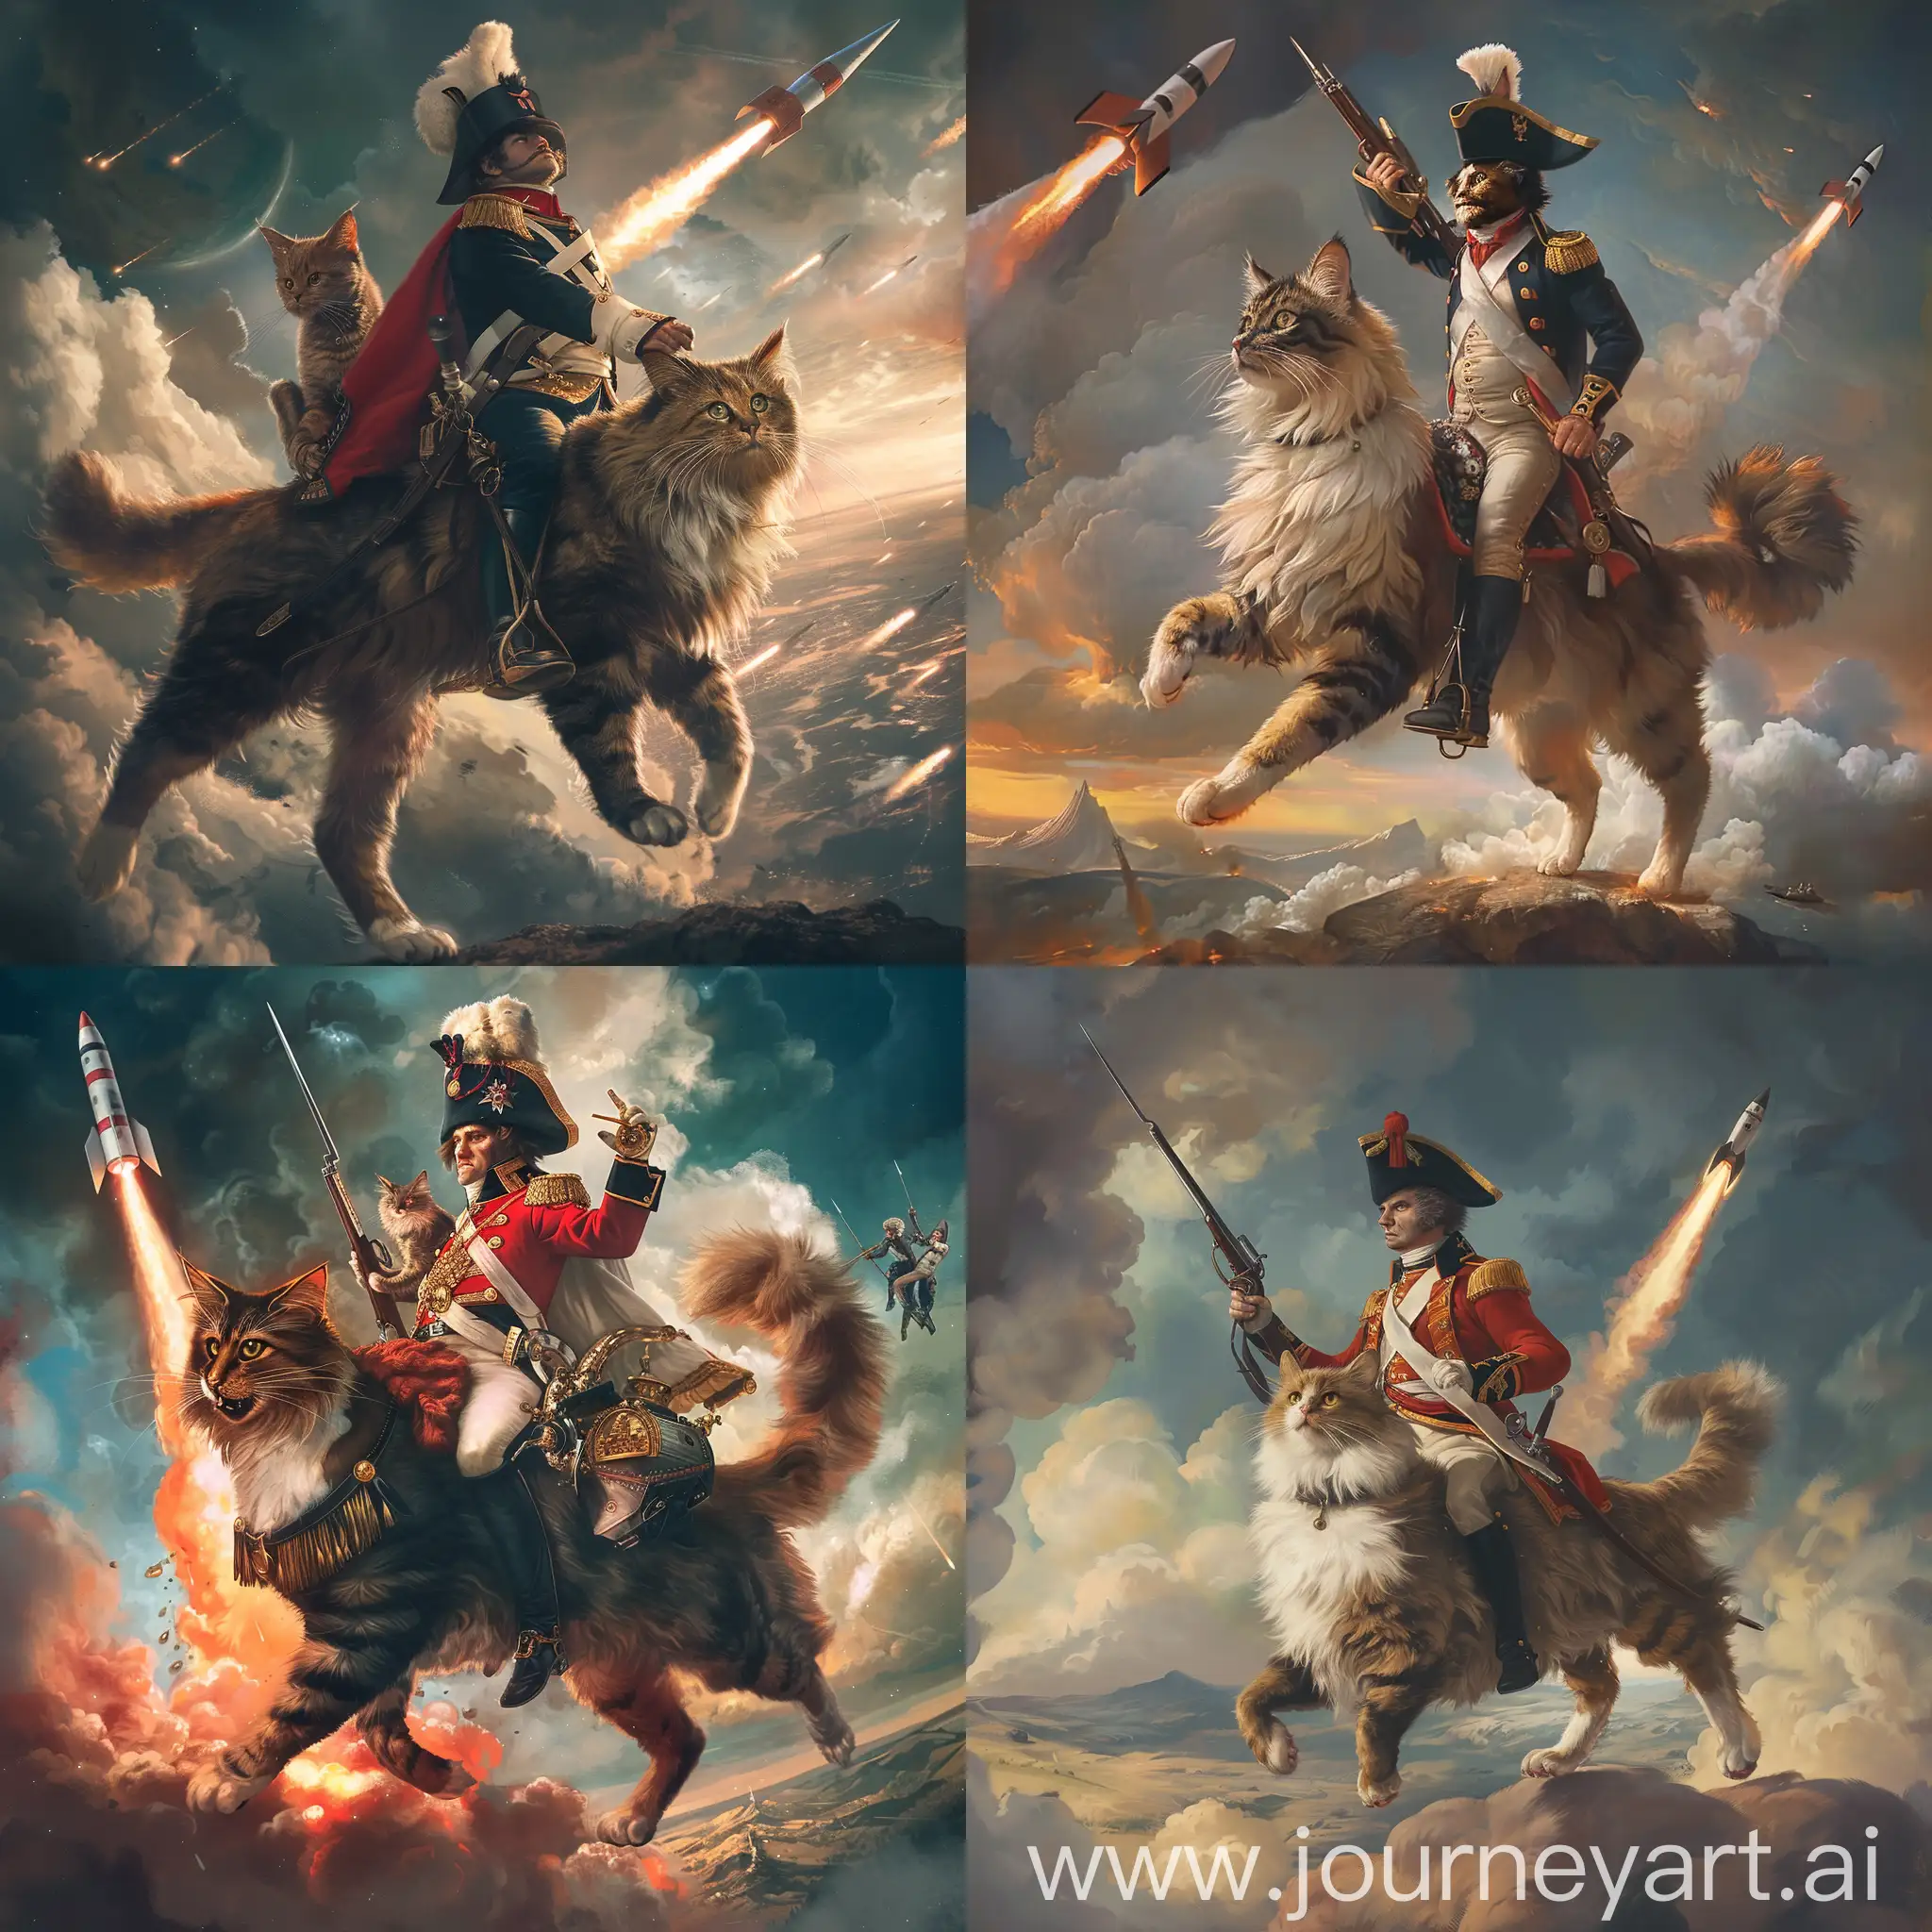 Napoleon-Bonaparte-on-Maine-Coon-Cat-Leads-Charge-Against-RocketRiding-Furries